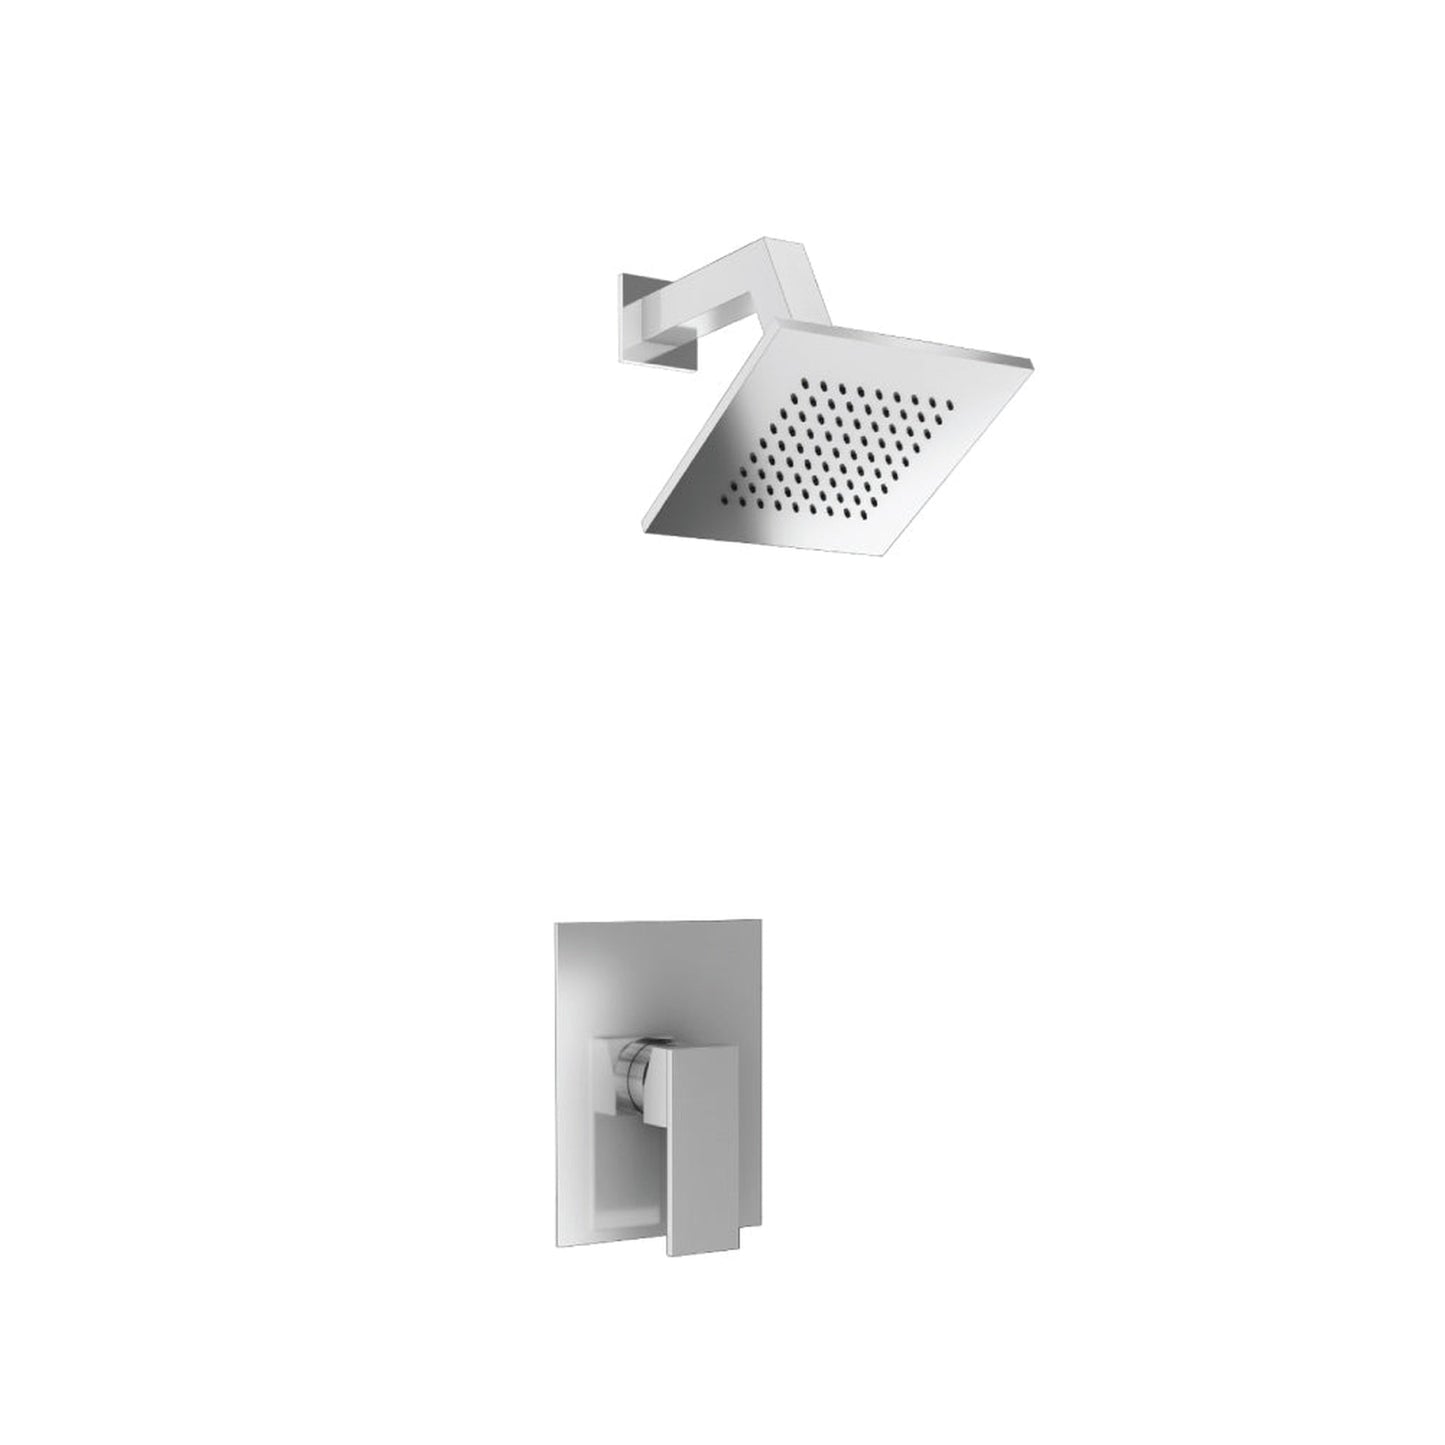 Isenberg Serie 160 Single Output Polished Nickel PVD Wall-Mounted Shower Set With 6" Solid Brass Rainhead Shower Head, Single Handle Shower Trim and 1-Output Single Control Pressure Balance Valve